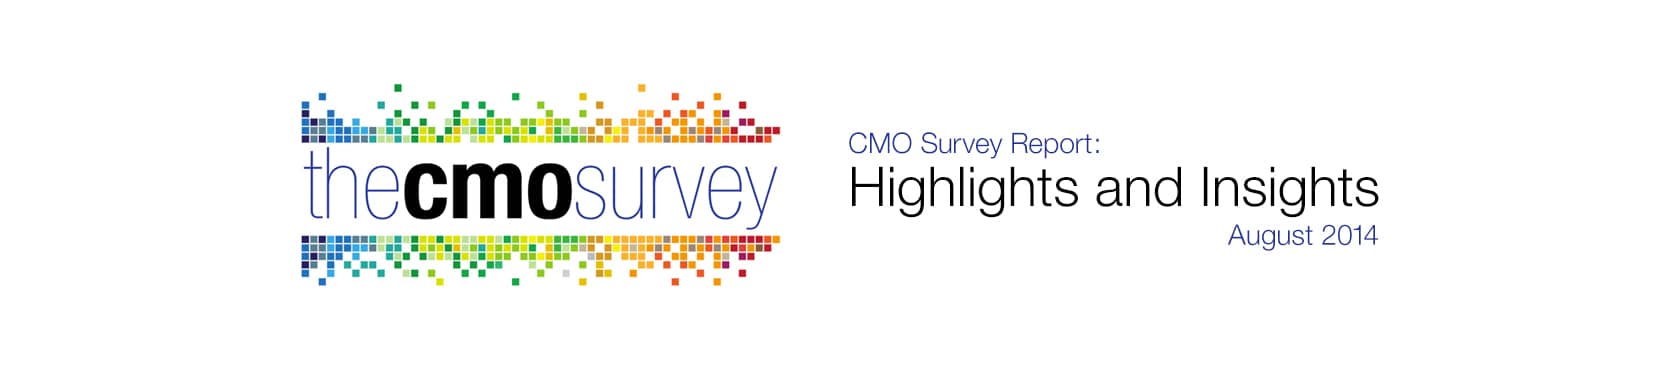 The CMO Survery Report: Highlights and Insights August 2014